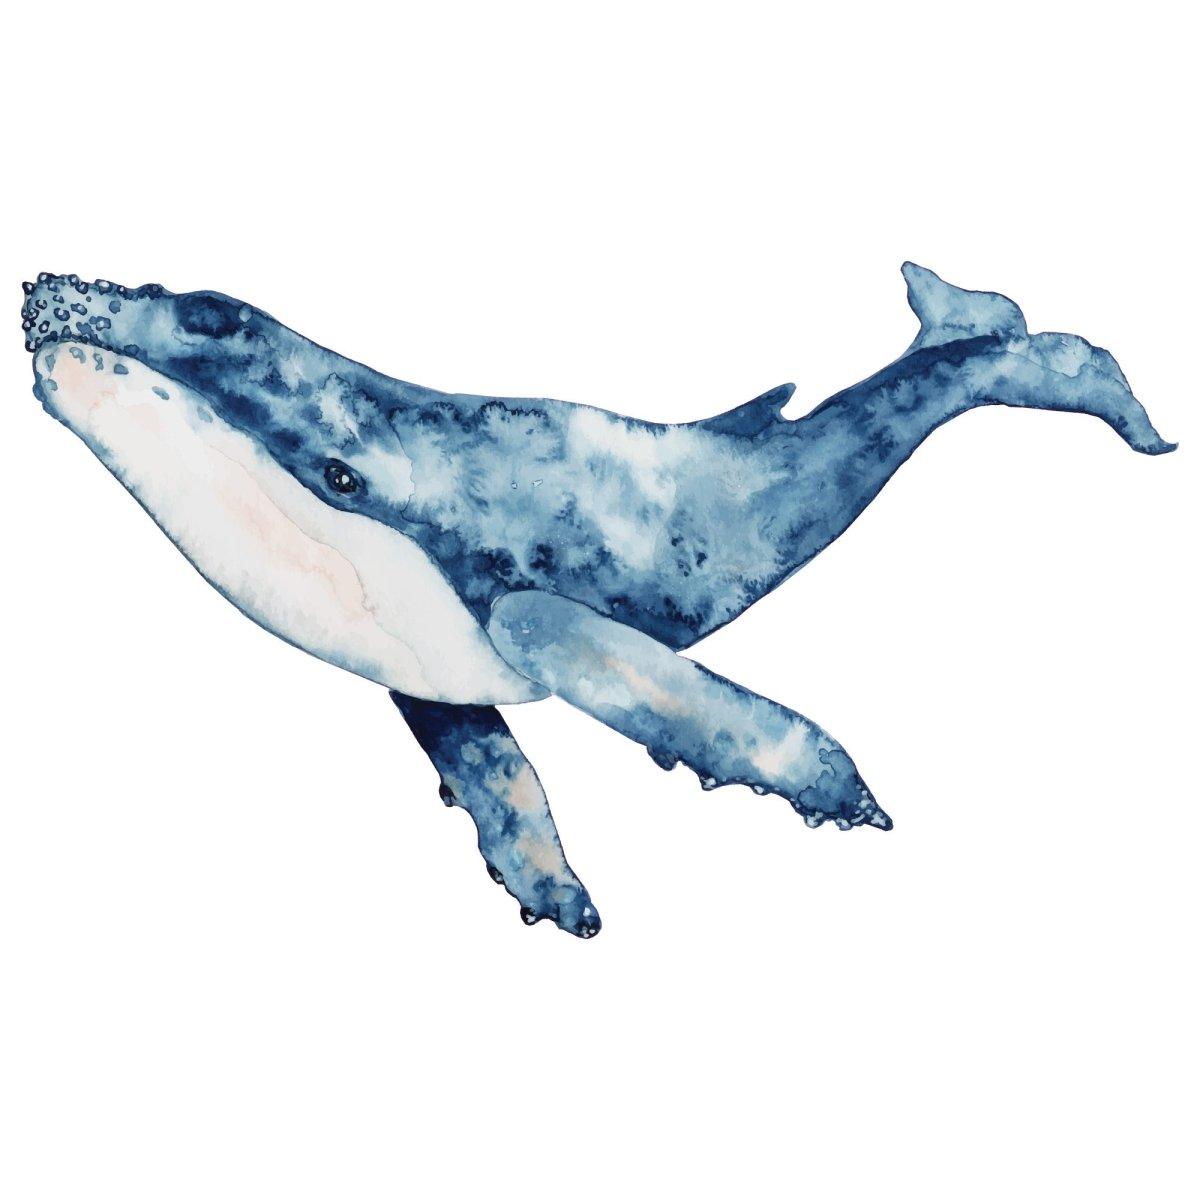 Large Whale Wall Decal - Printibly